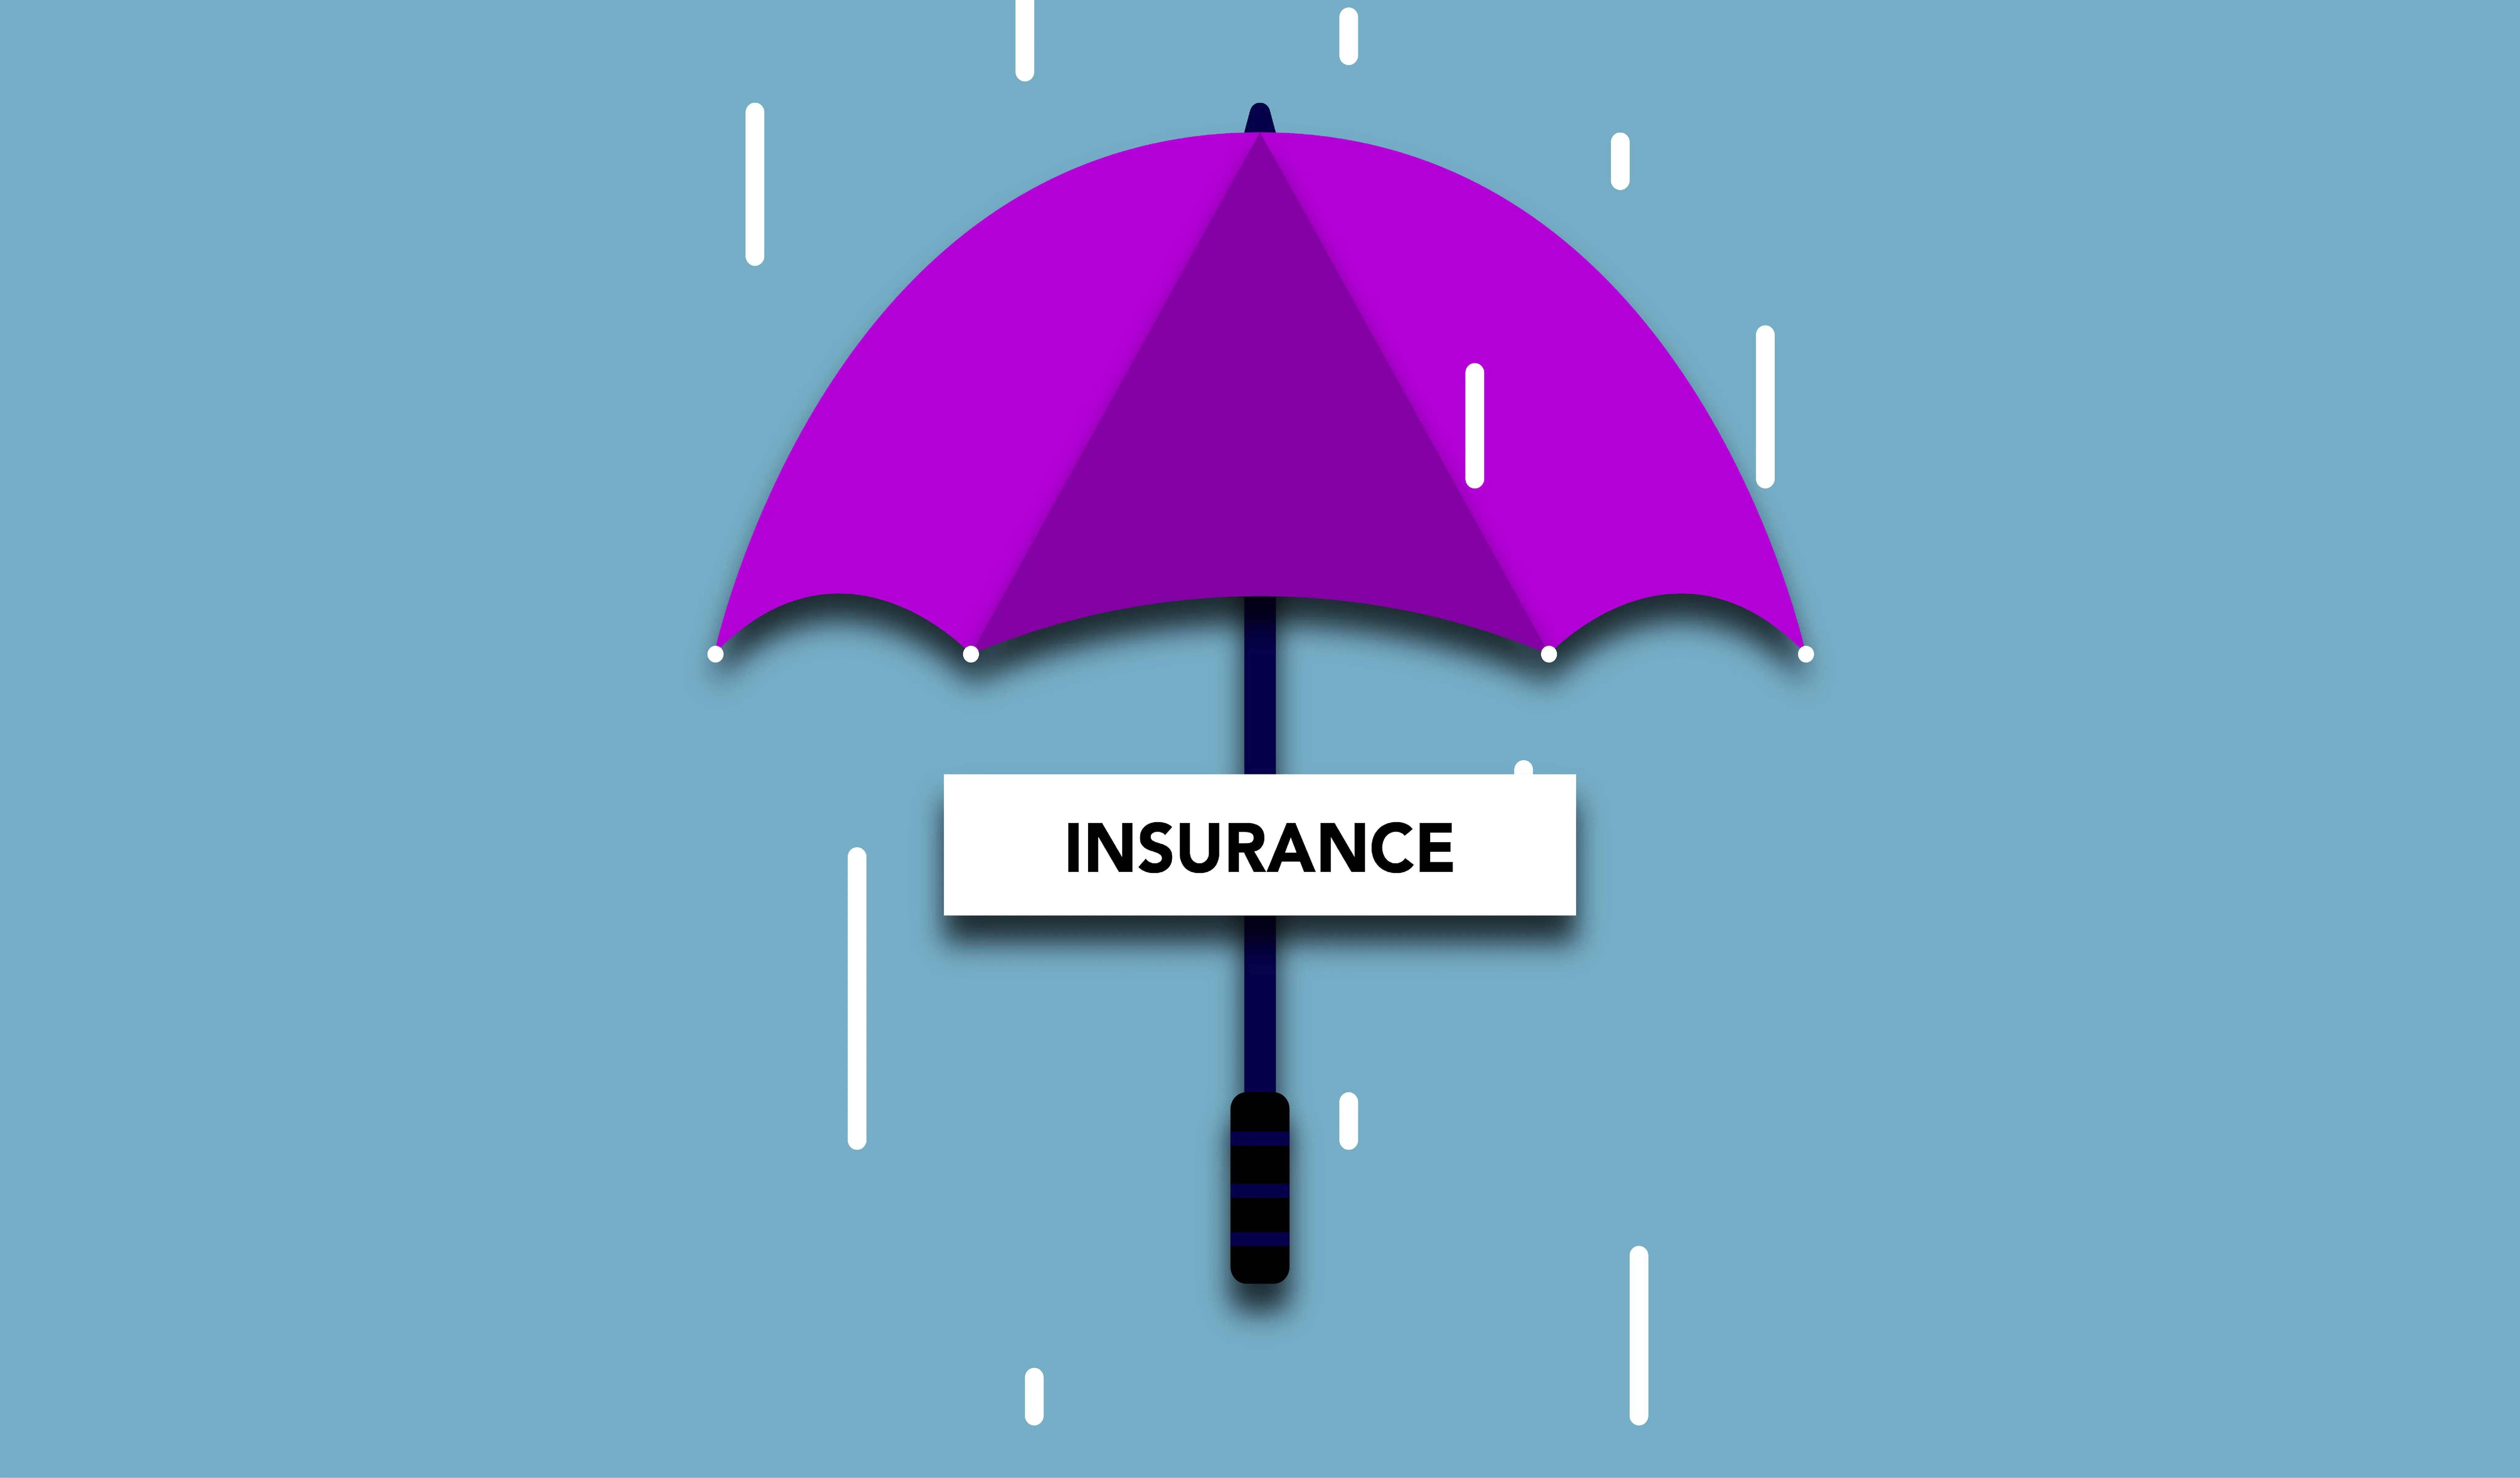 How to Handle Insurance Policy Renewals